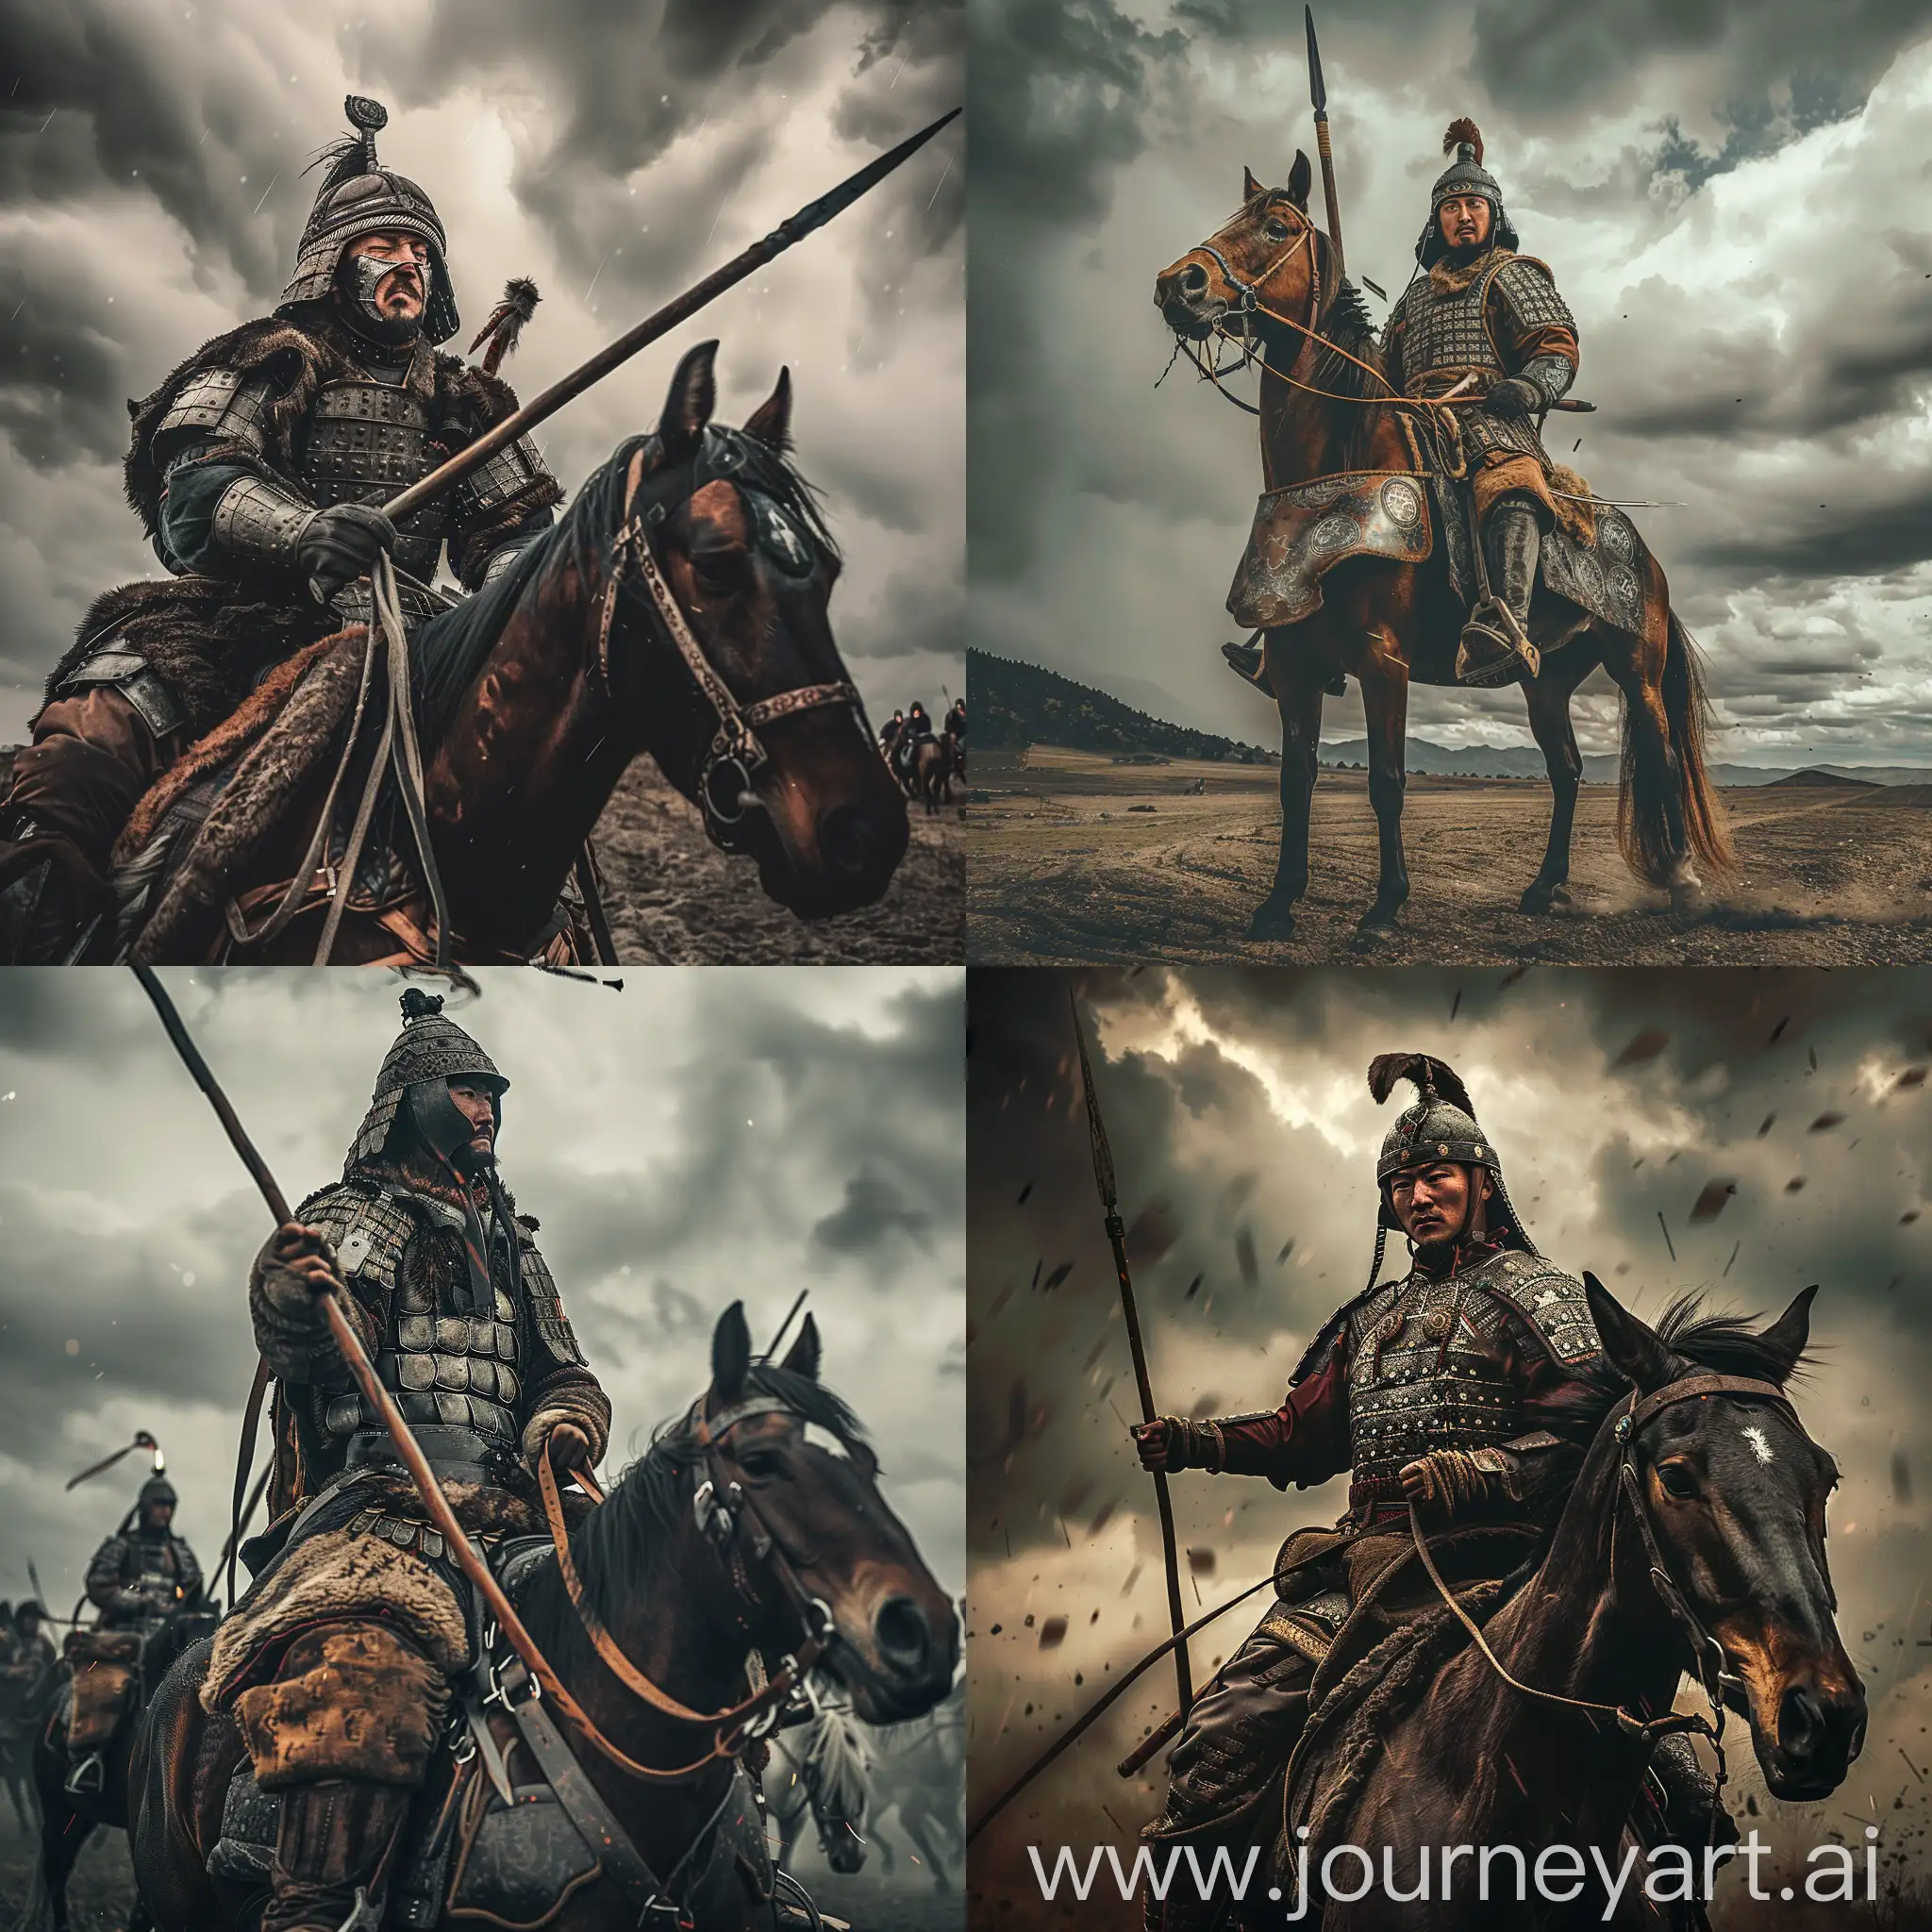 Mongolian keshik warrior on horse at battle field, depicted in heavy mongolian armor and helmet, equipping a spear, dramatic weather, cinematic lighting, realistic image